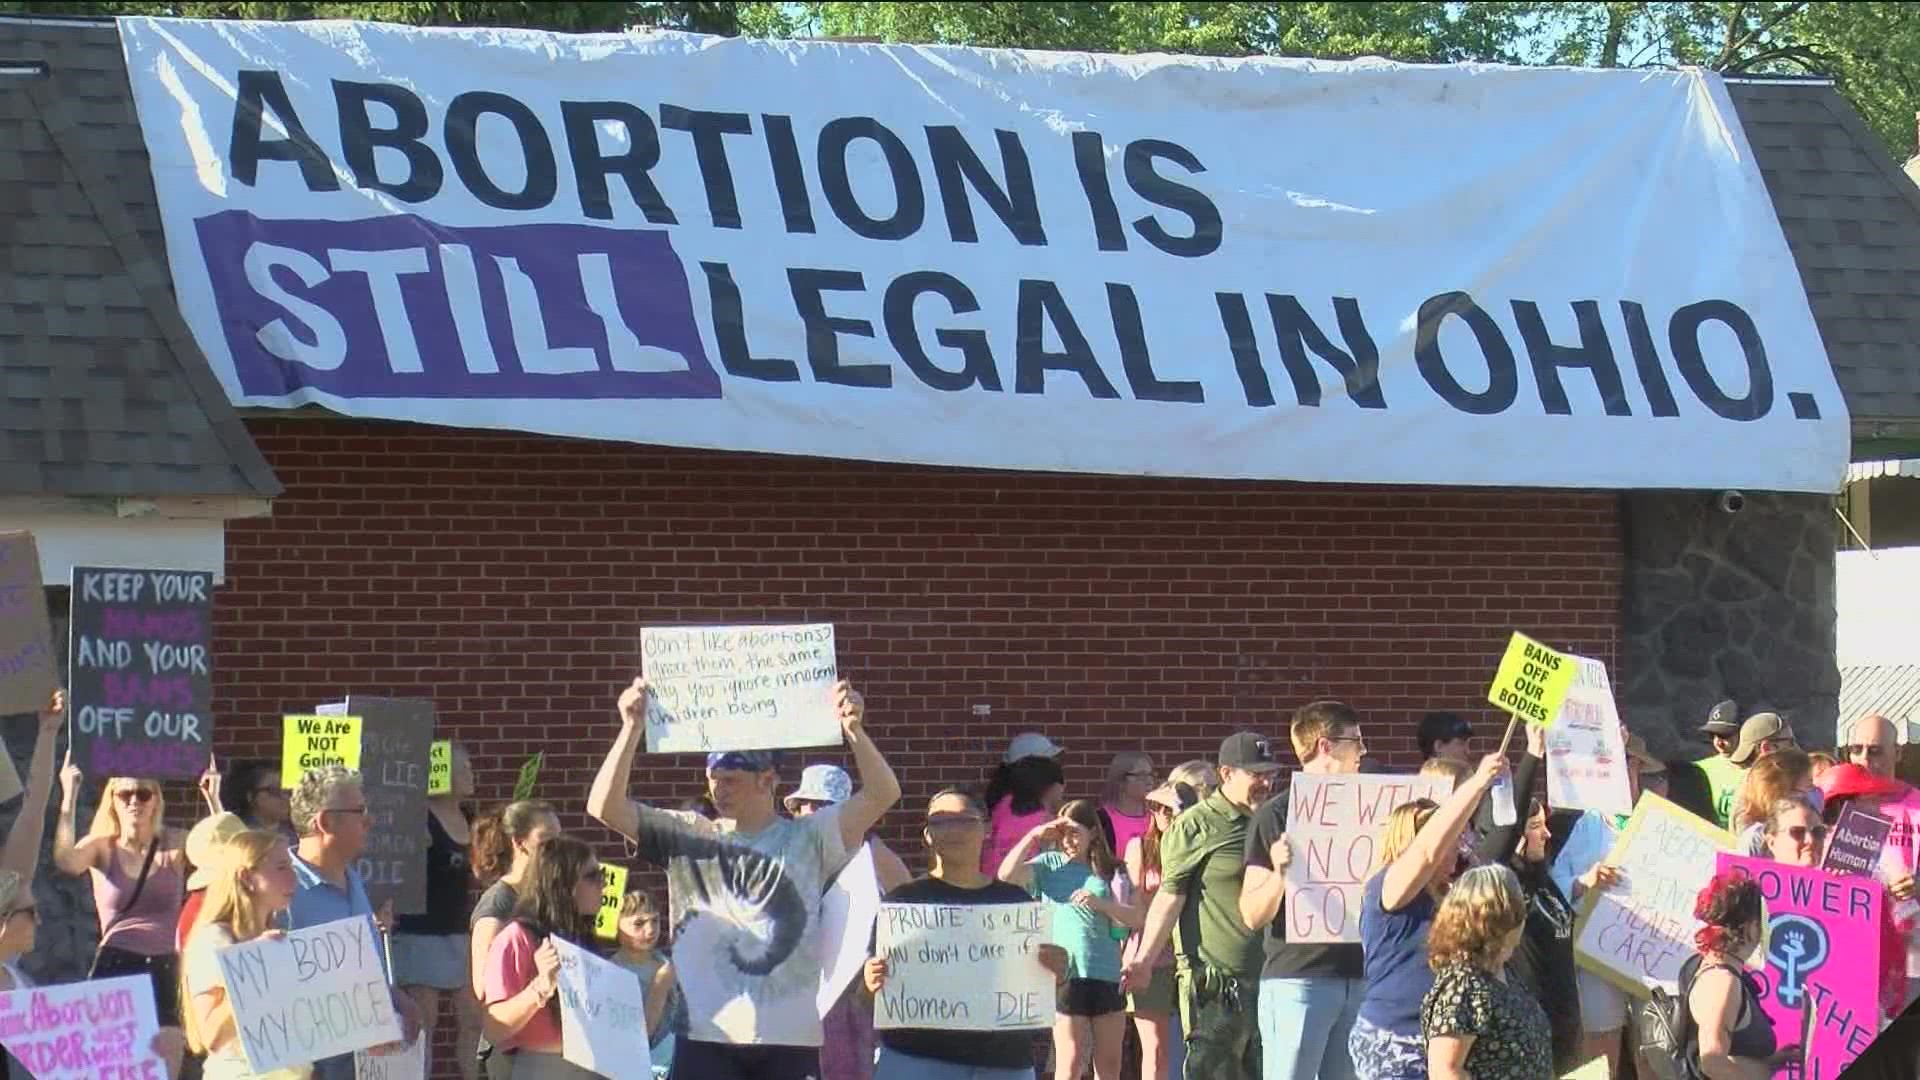 The mayor and council members voiced on social media that they are working on ways to make sure abortion and reproductive healthcare are accessible to all Toledoans.